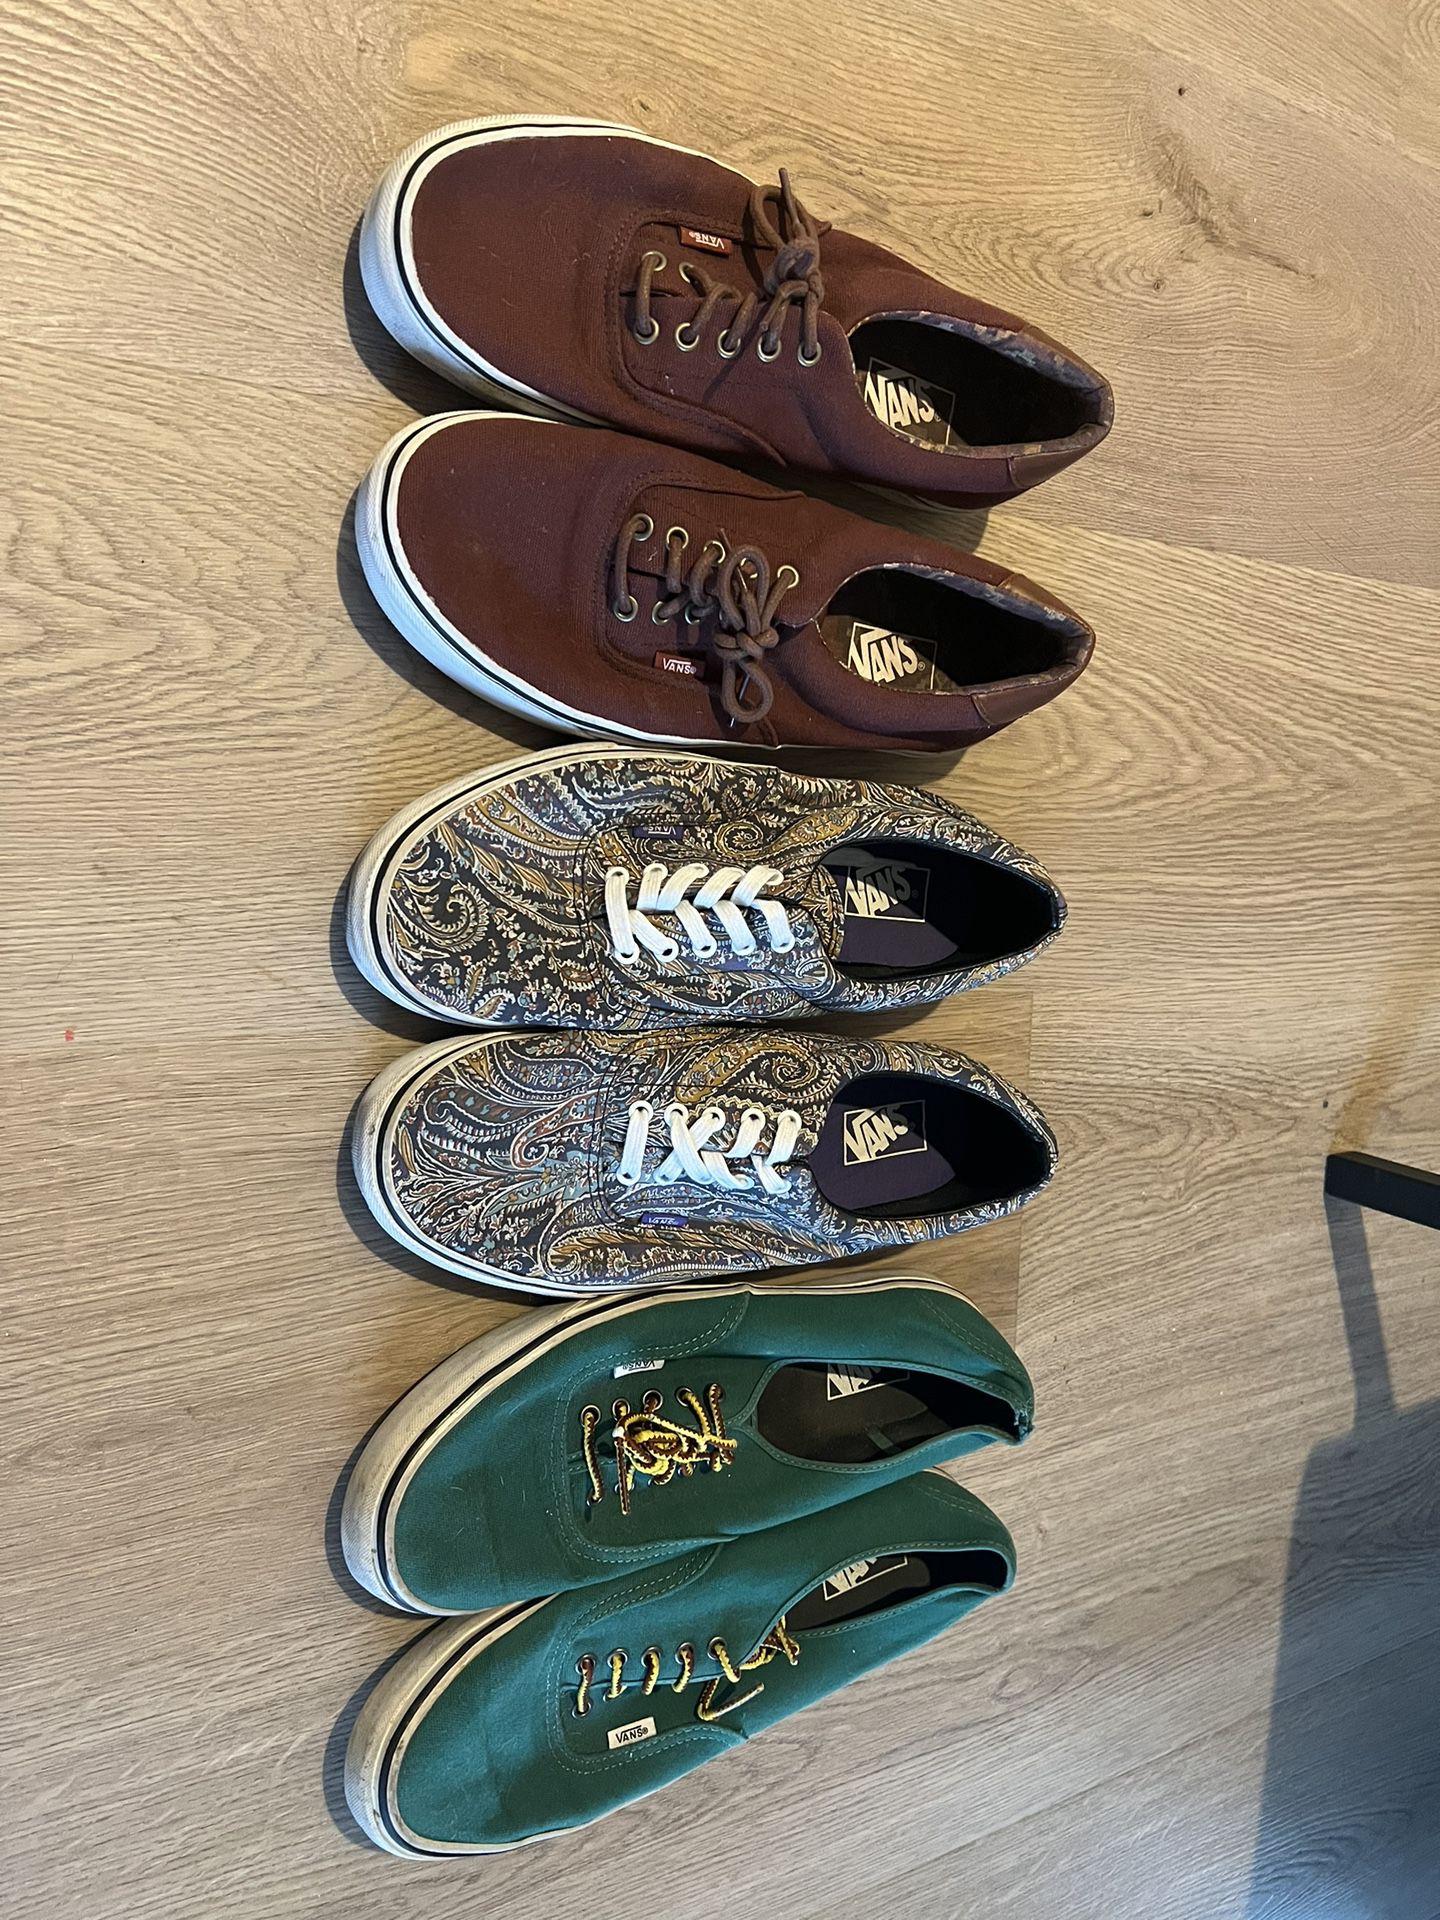 Lightly Used Vans Shoes 